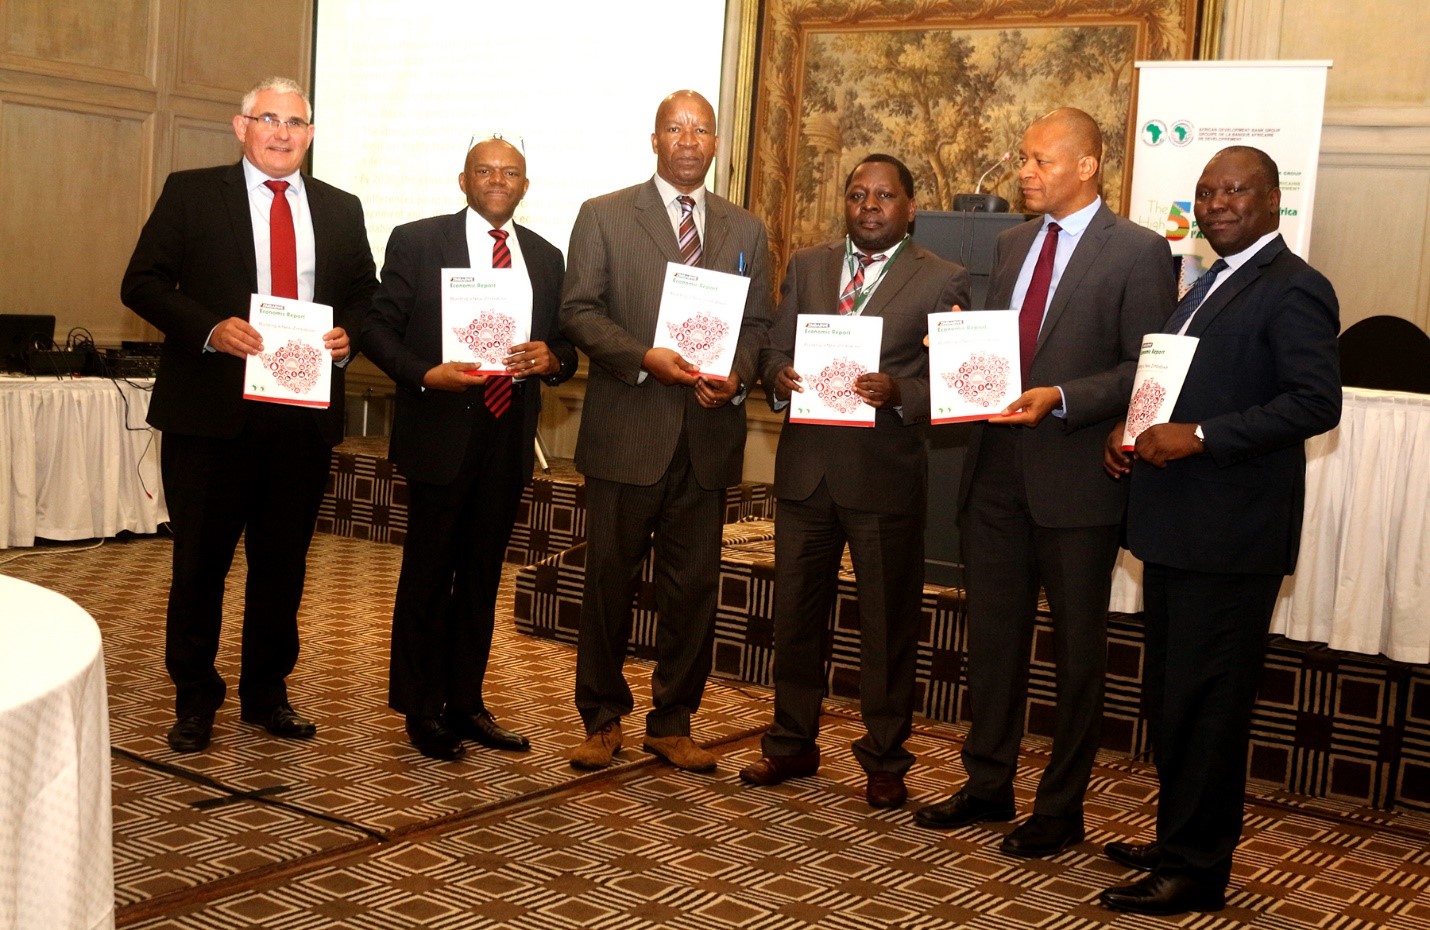 “Building a new Zimbabwe”, AfDB report to spark the country’s economic development